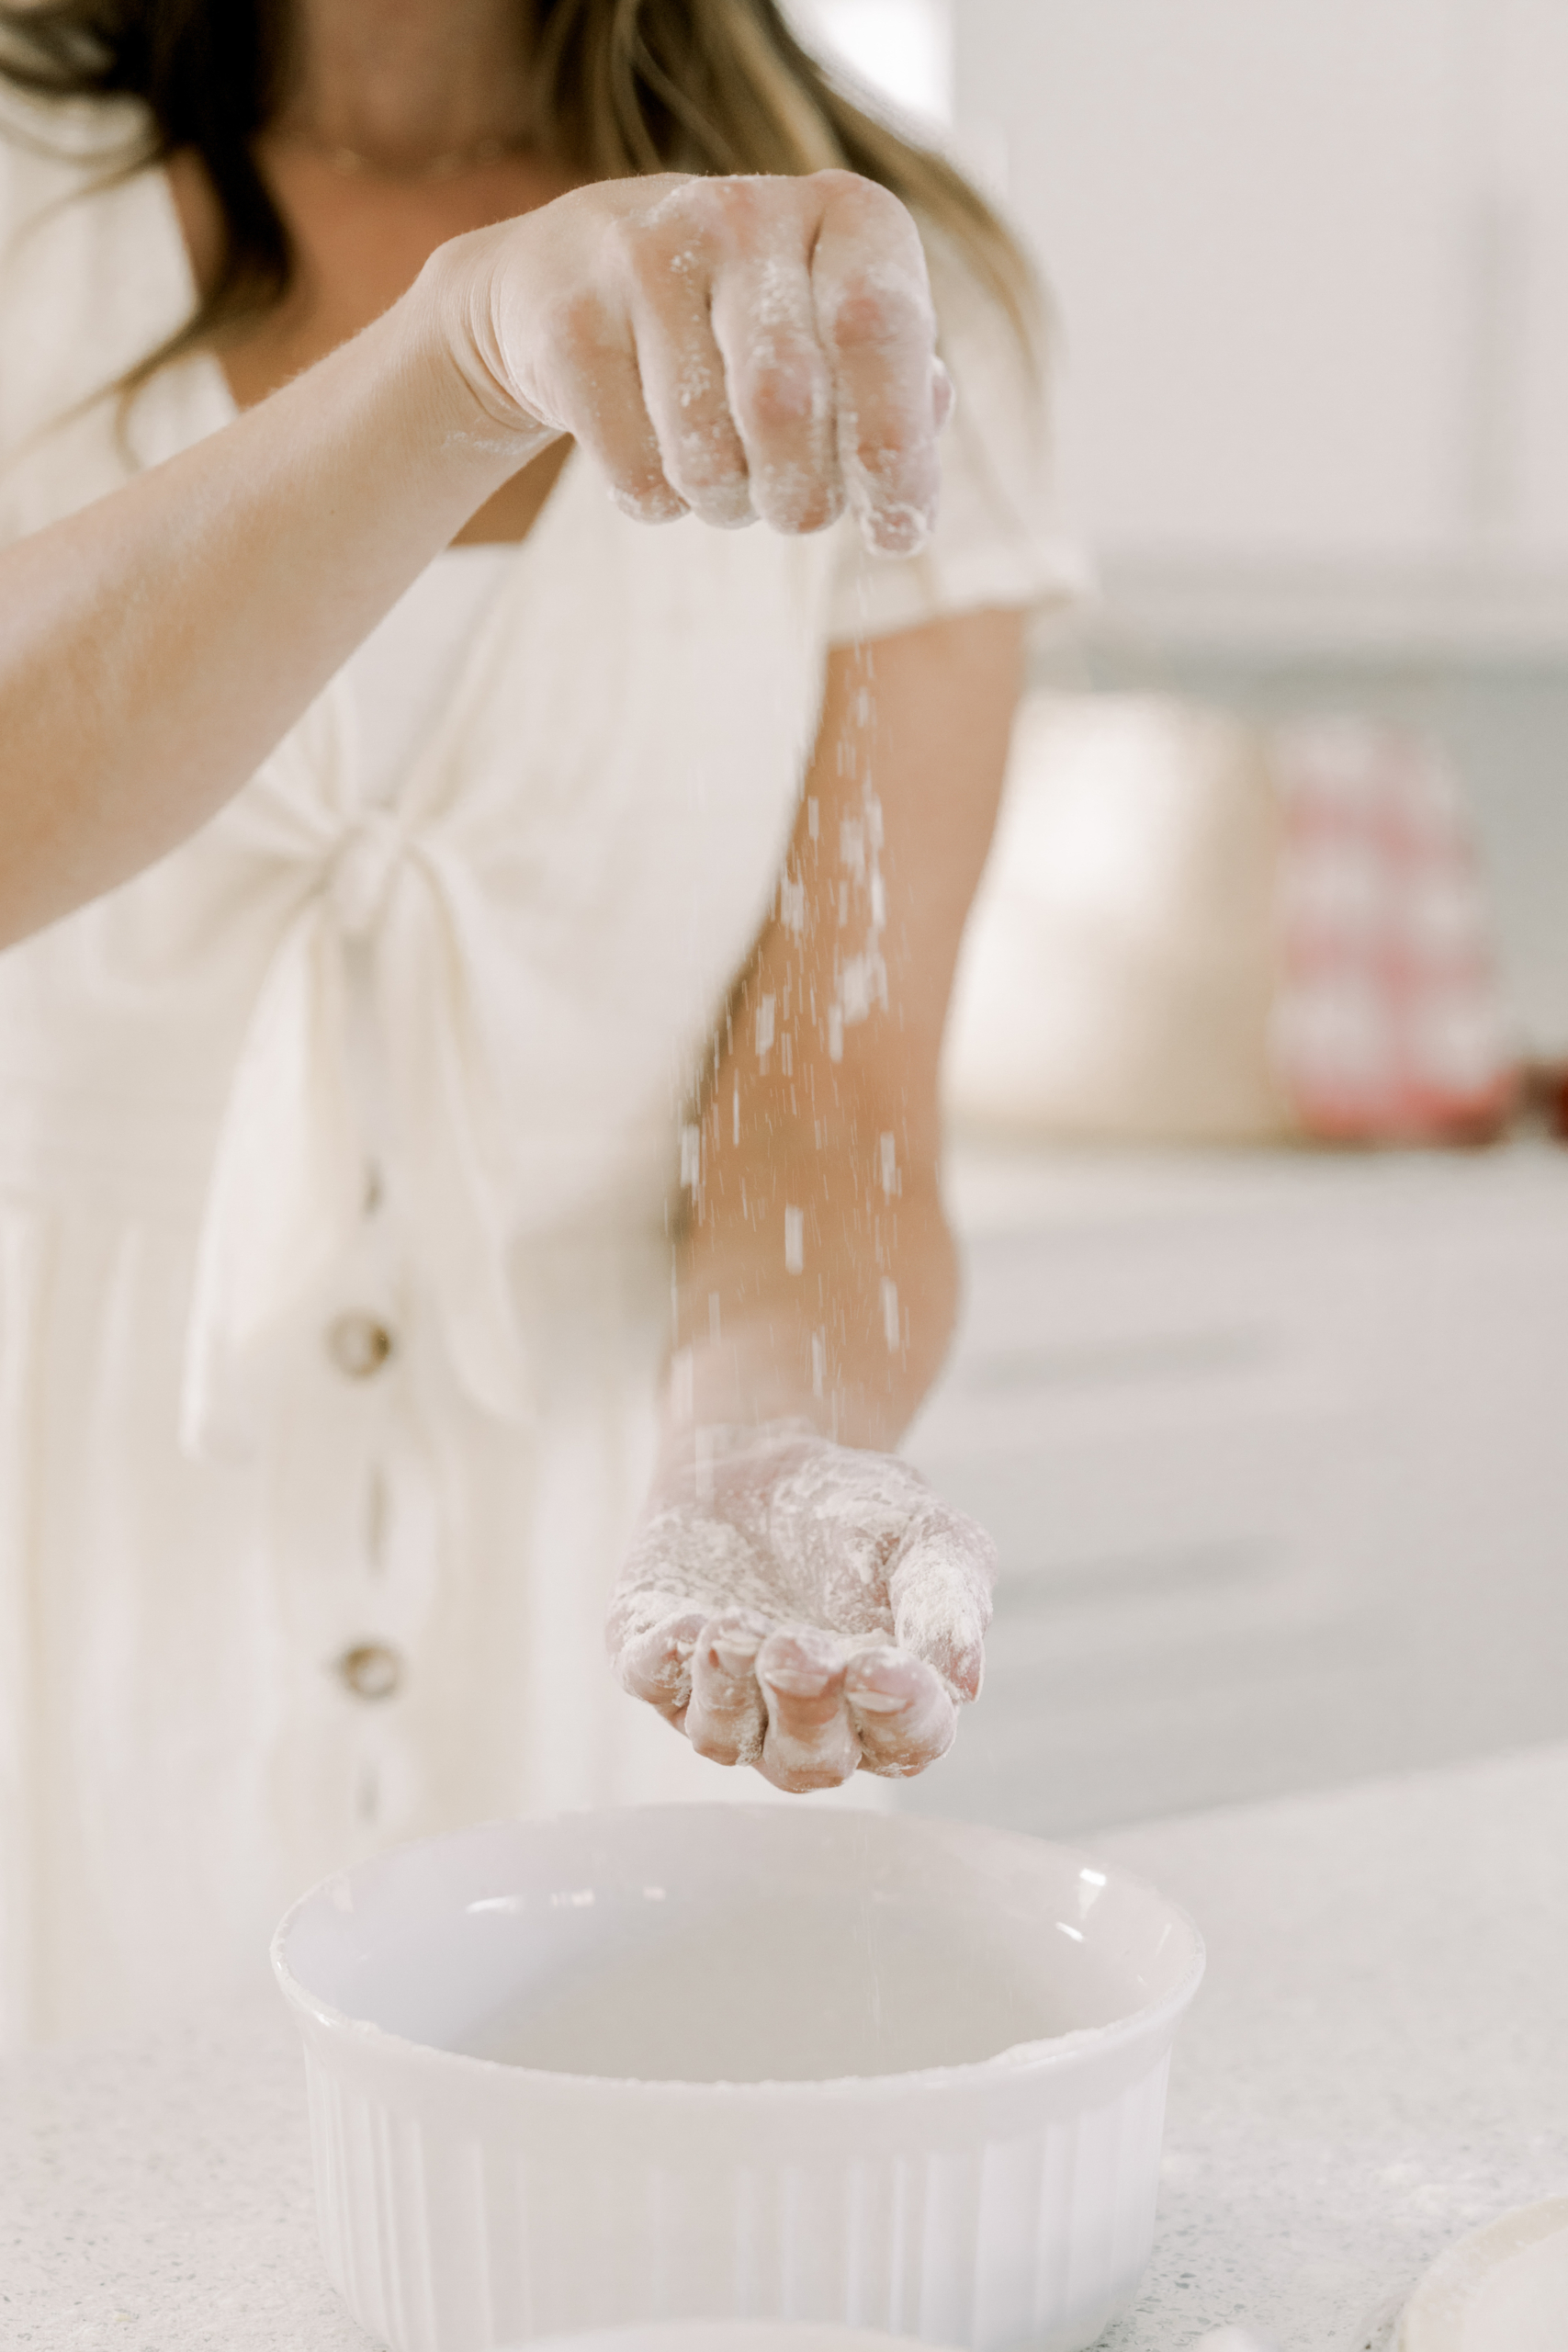 non descript woman in the kitchen sprinkling flour into her hand